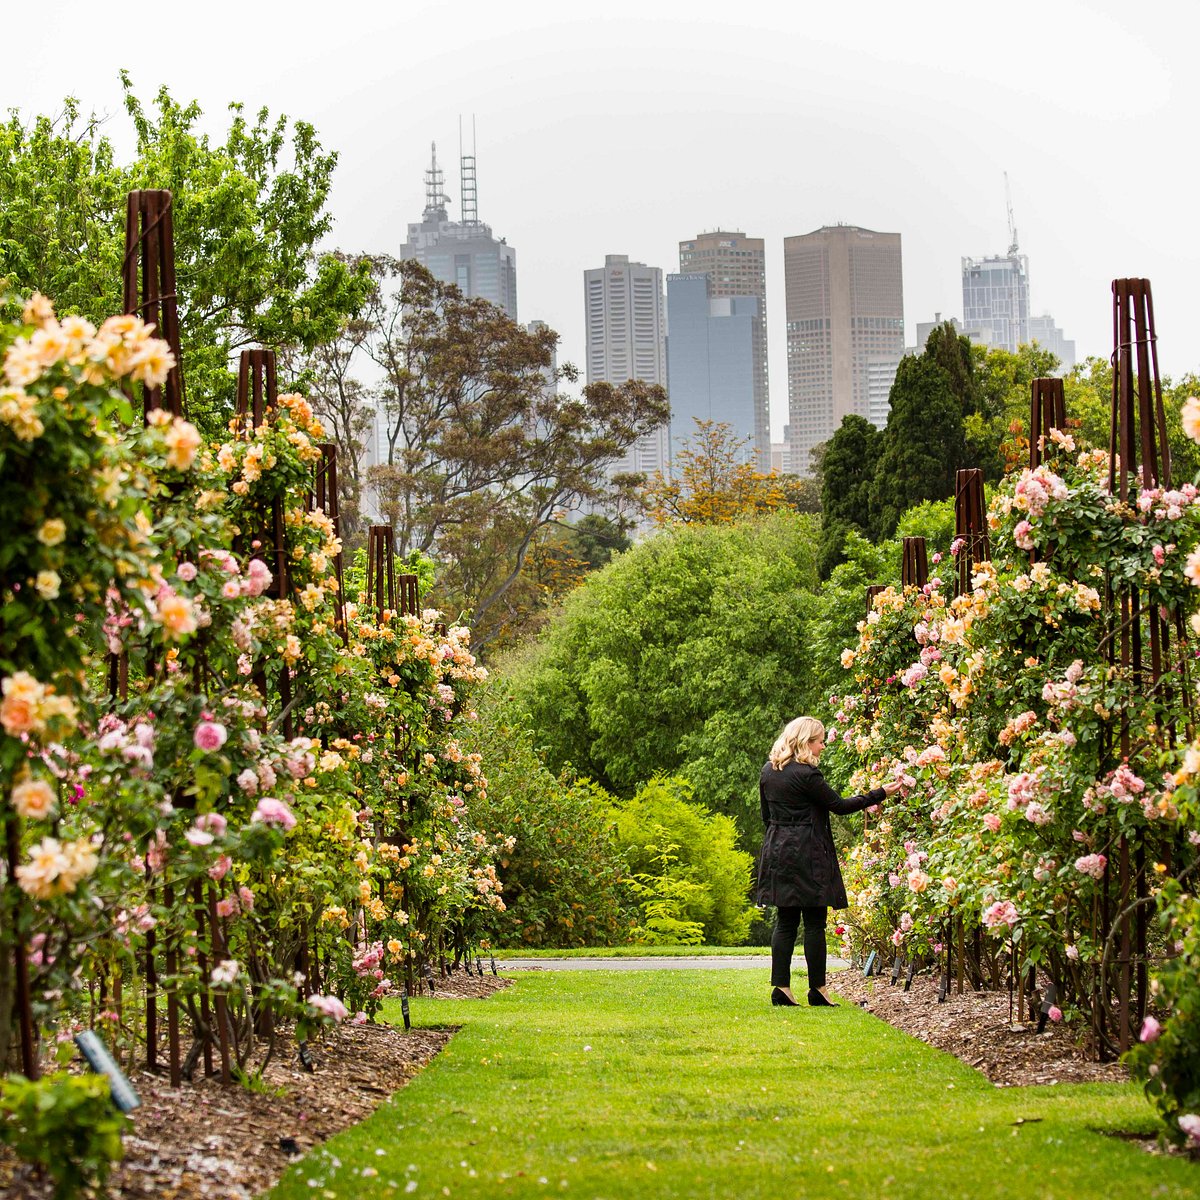 Royal Botanic Gardens Victoria (Melbourne) All You Need to Know